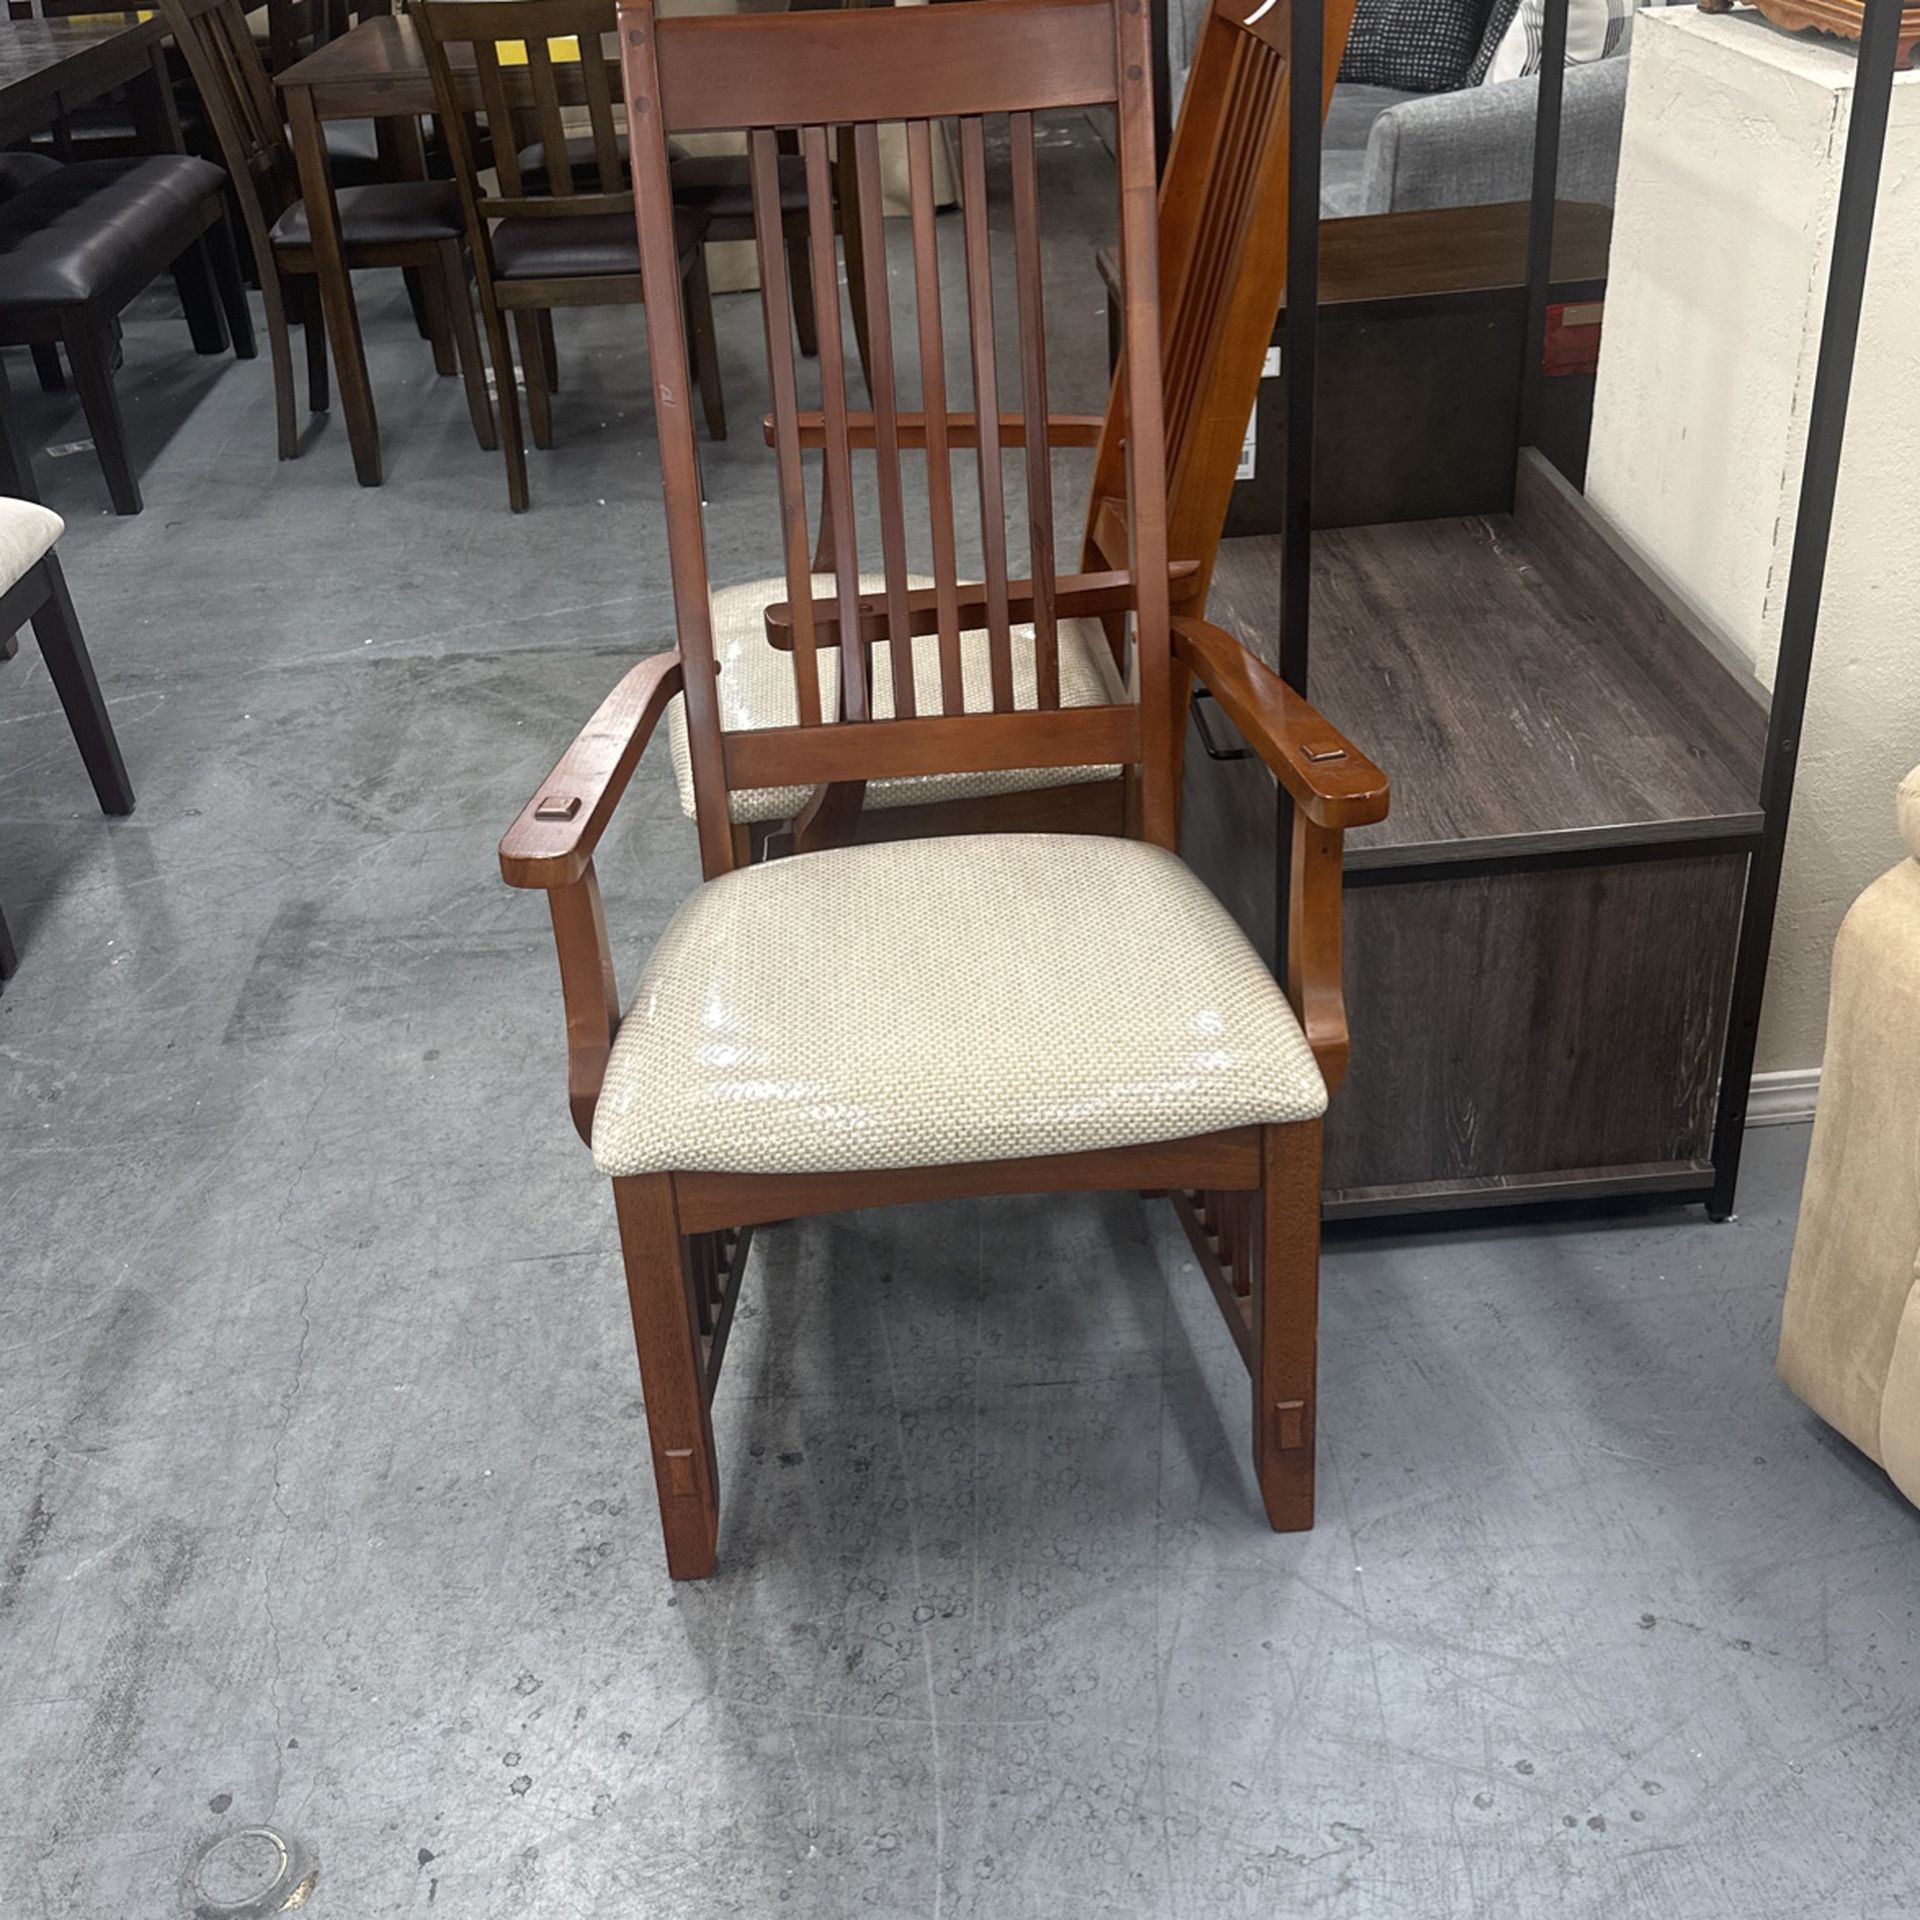 Chair Clearance Lowest Price 